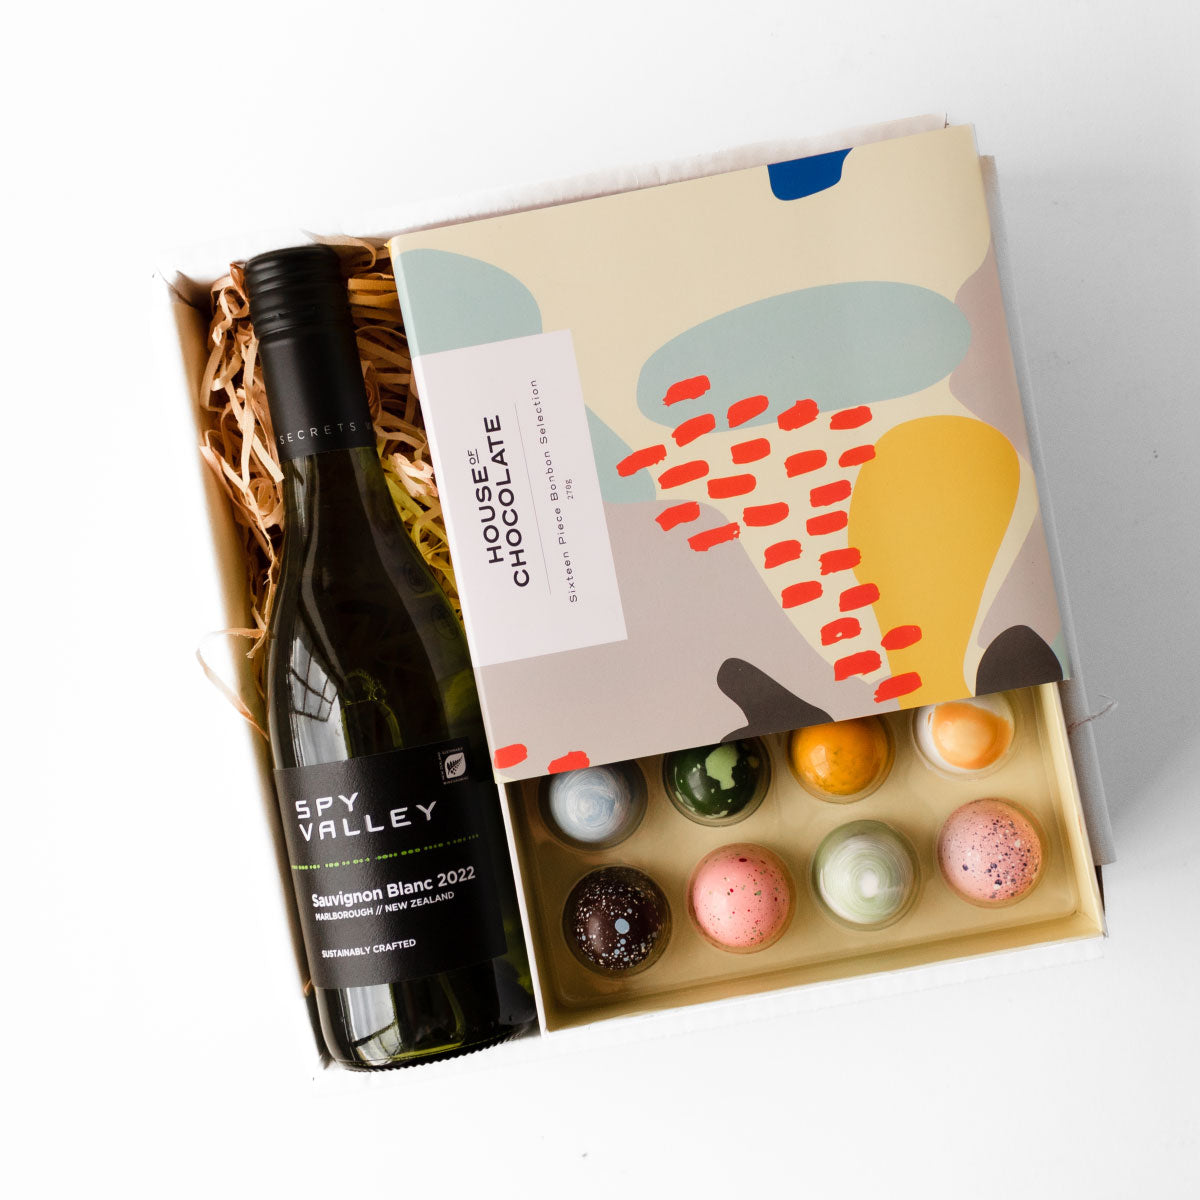 Gourmet Gifts Artisan Baskets NZ Special Moments Wine & Chocolate Gift Box